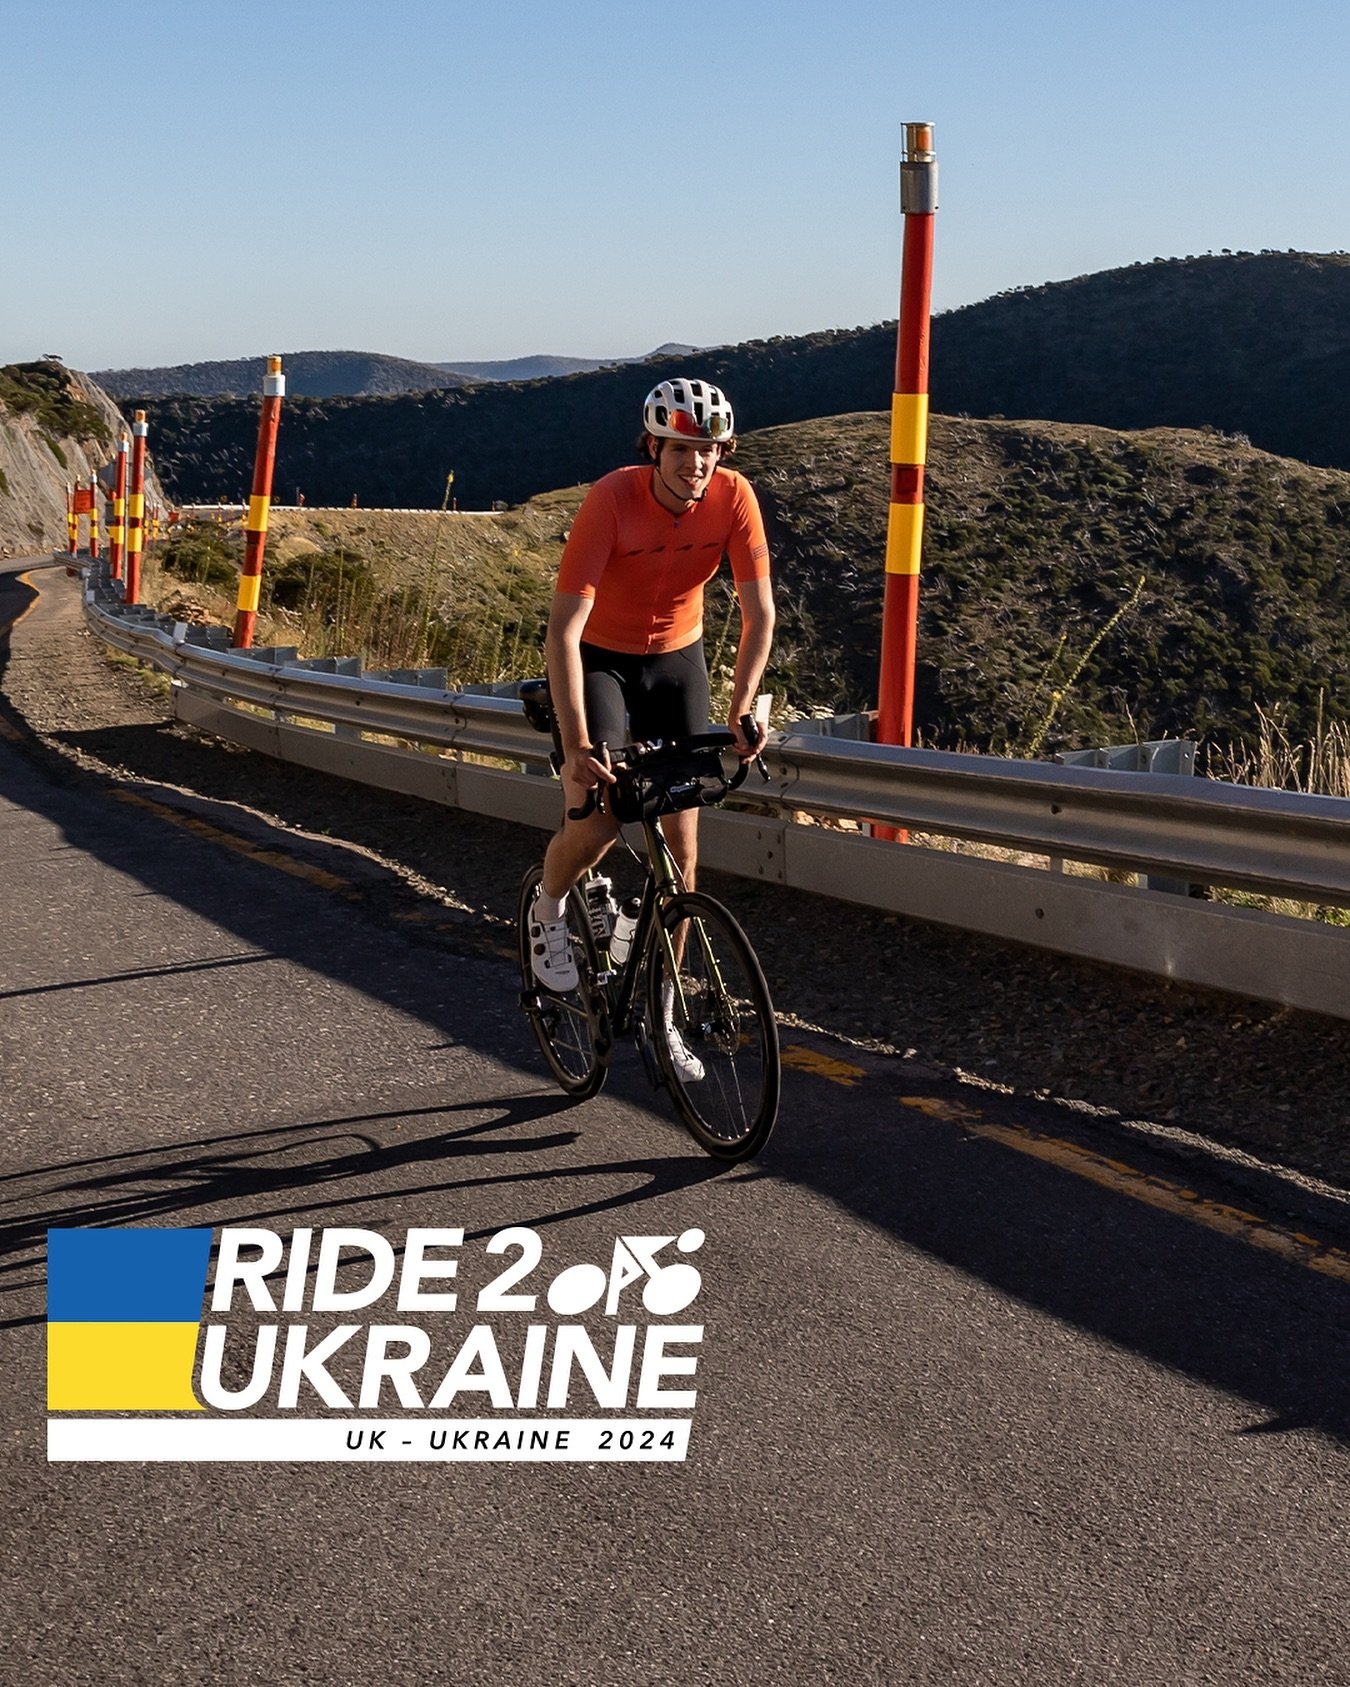 Ride 2 Ukraine 🇺🇦 

In August ill be joining 3 other riders to cycling together from London to Ukraine.

We are super proud to be partnering with Voices of Children, a Ukrainian-based charitable foundation. They provide psychosocial support and tar